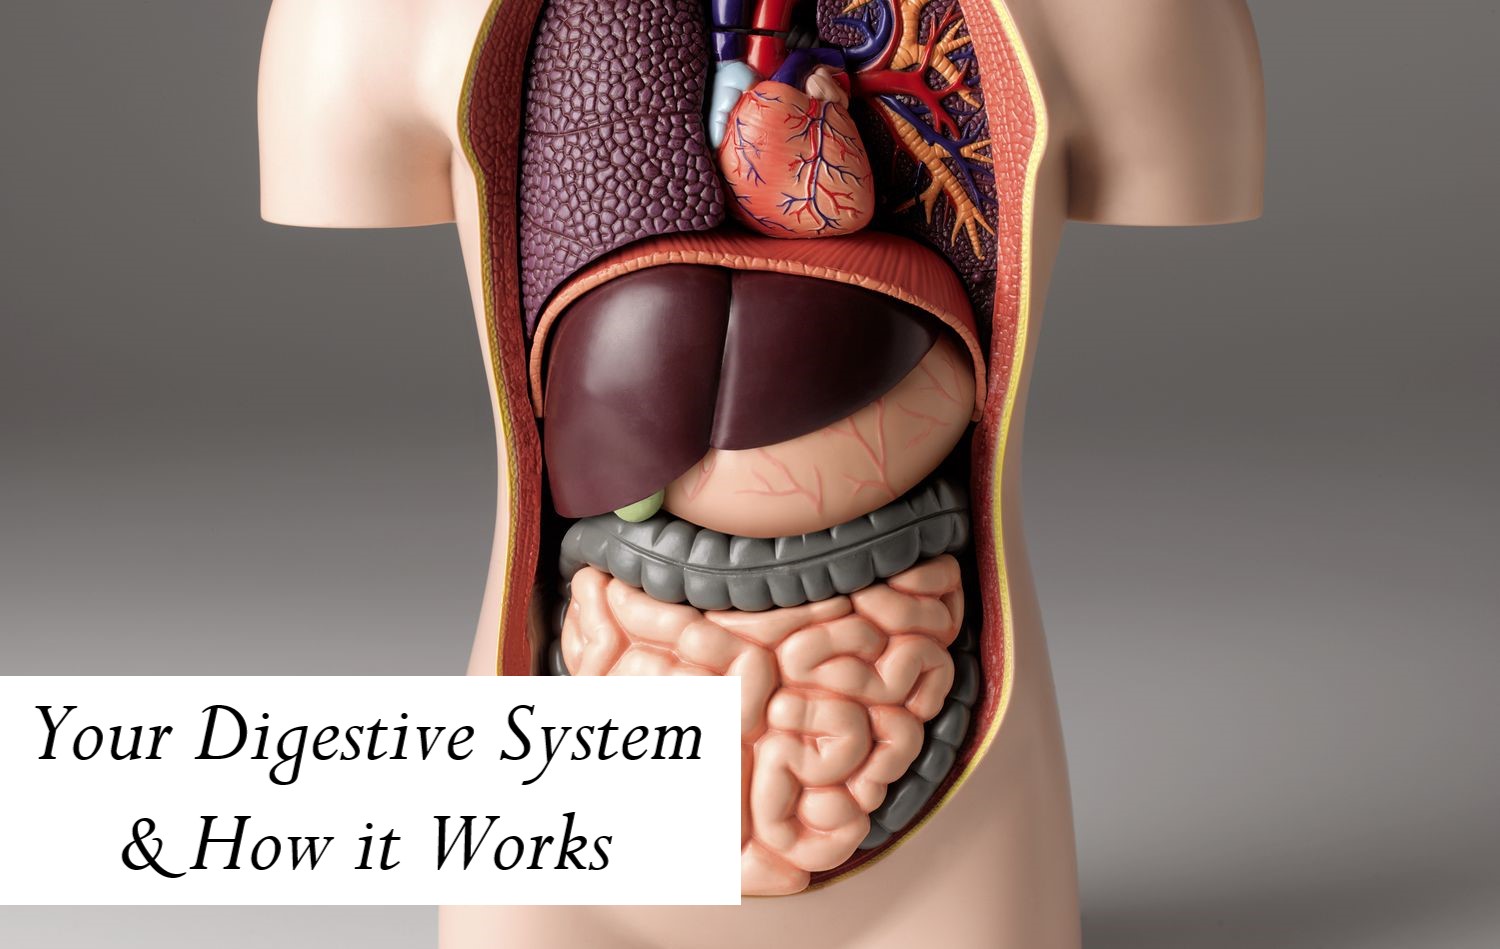 Your Digestive System & How it Works